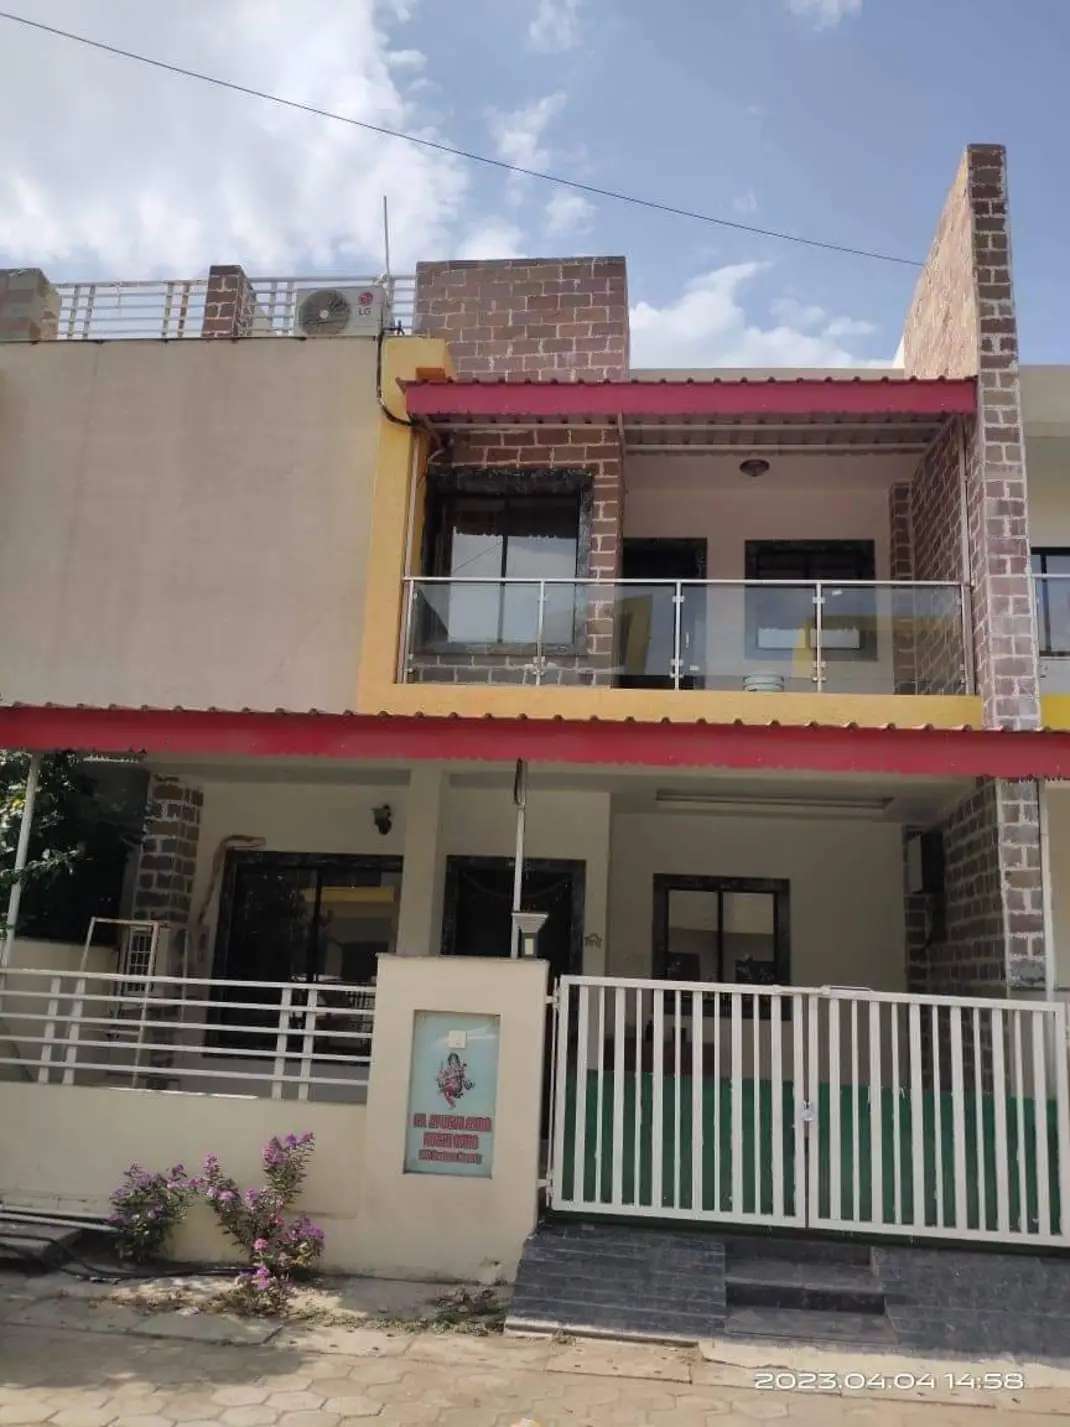 3 Bed/ 3 Bath Sell House/ Bungalow/ Villa; 800 sq. ft. lot; Ready To Move for sale @Hoshangabad road bhopal 